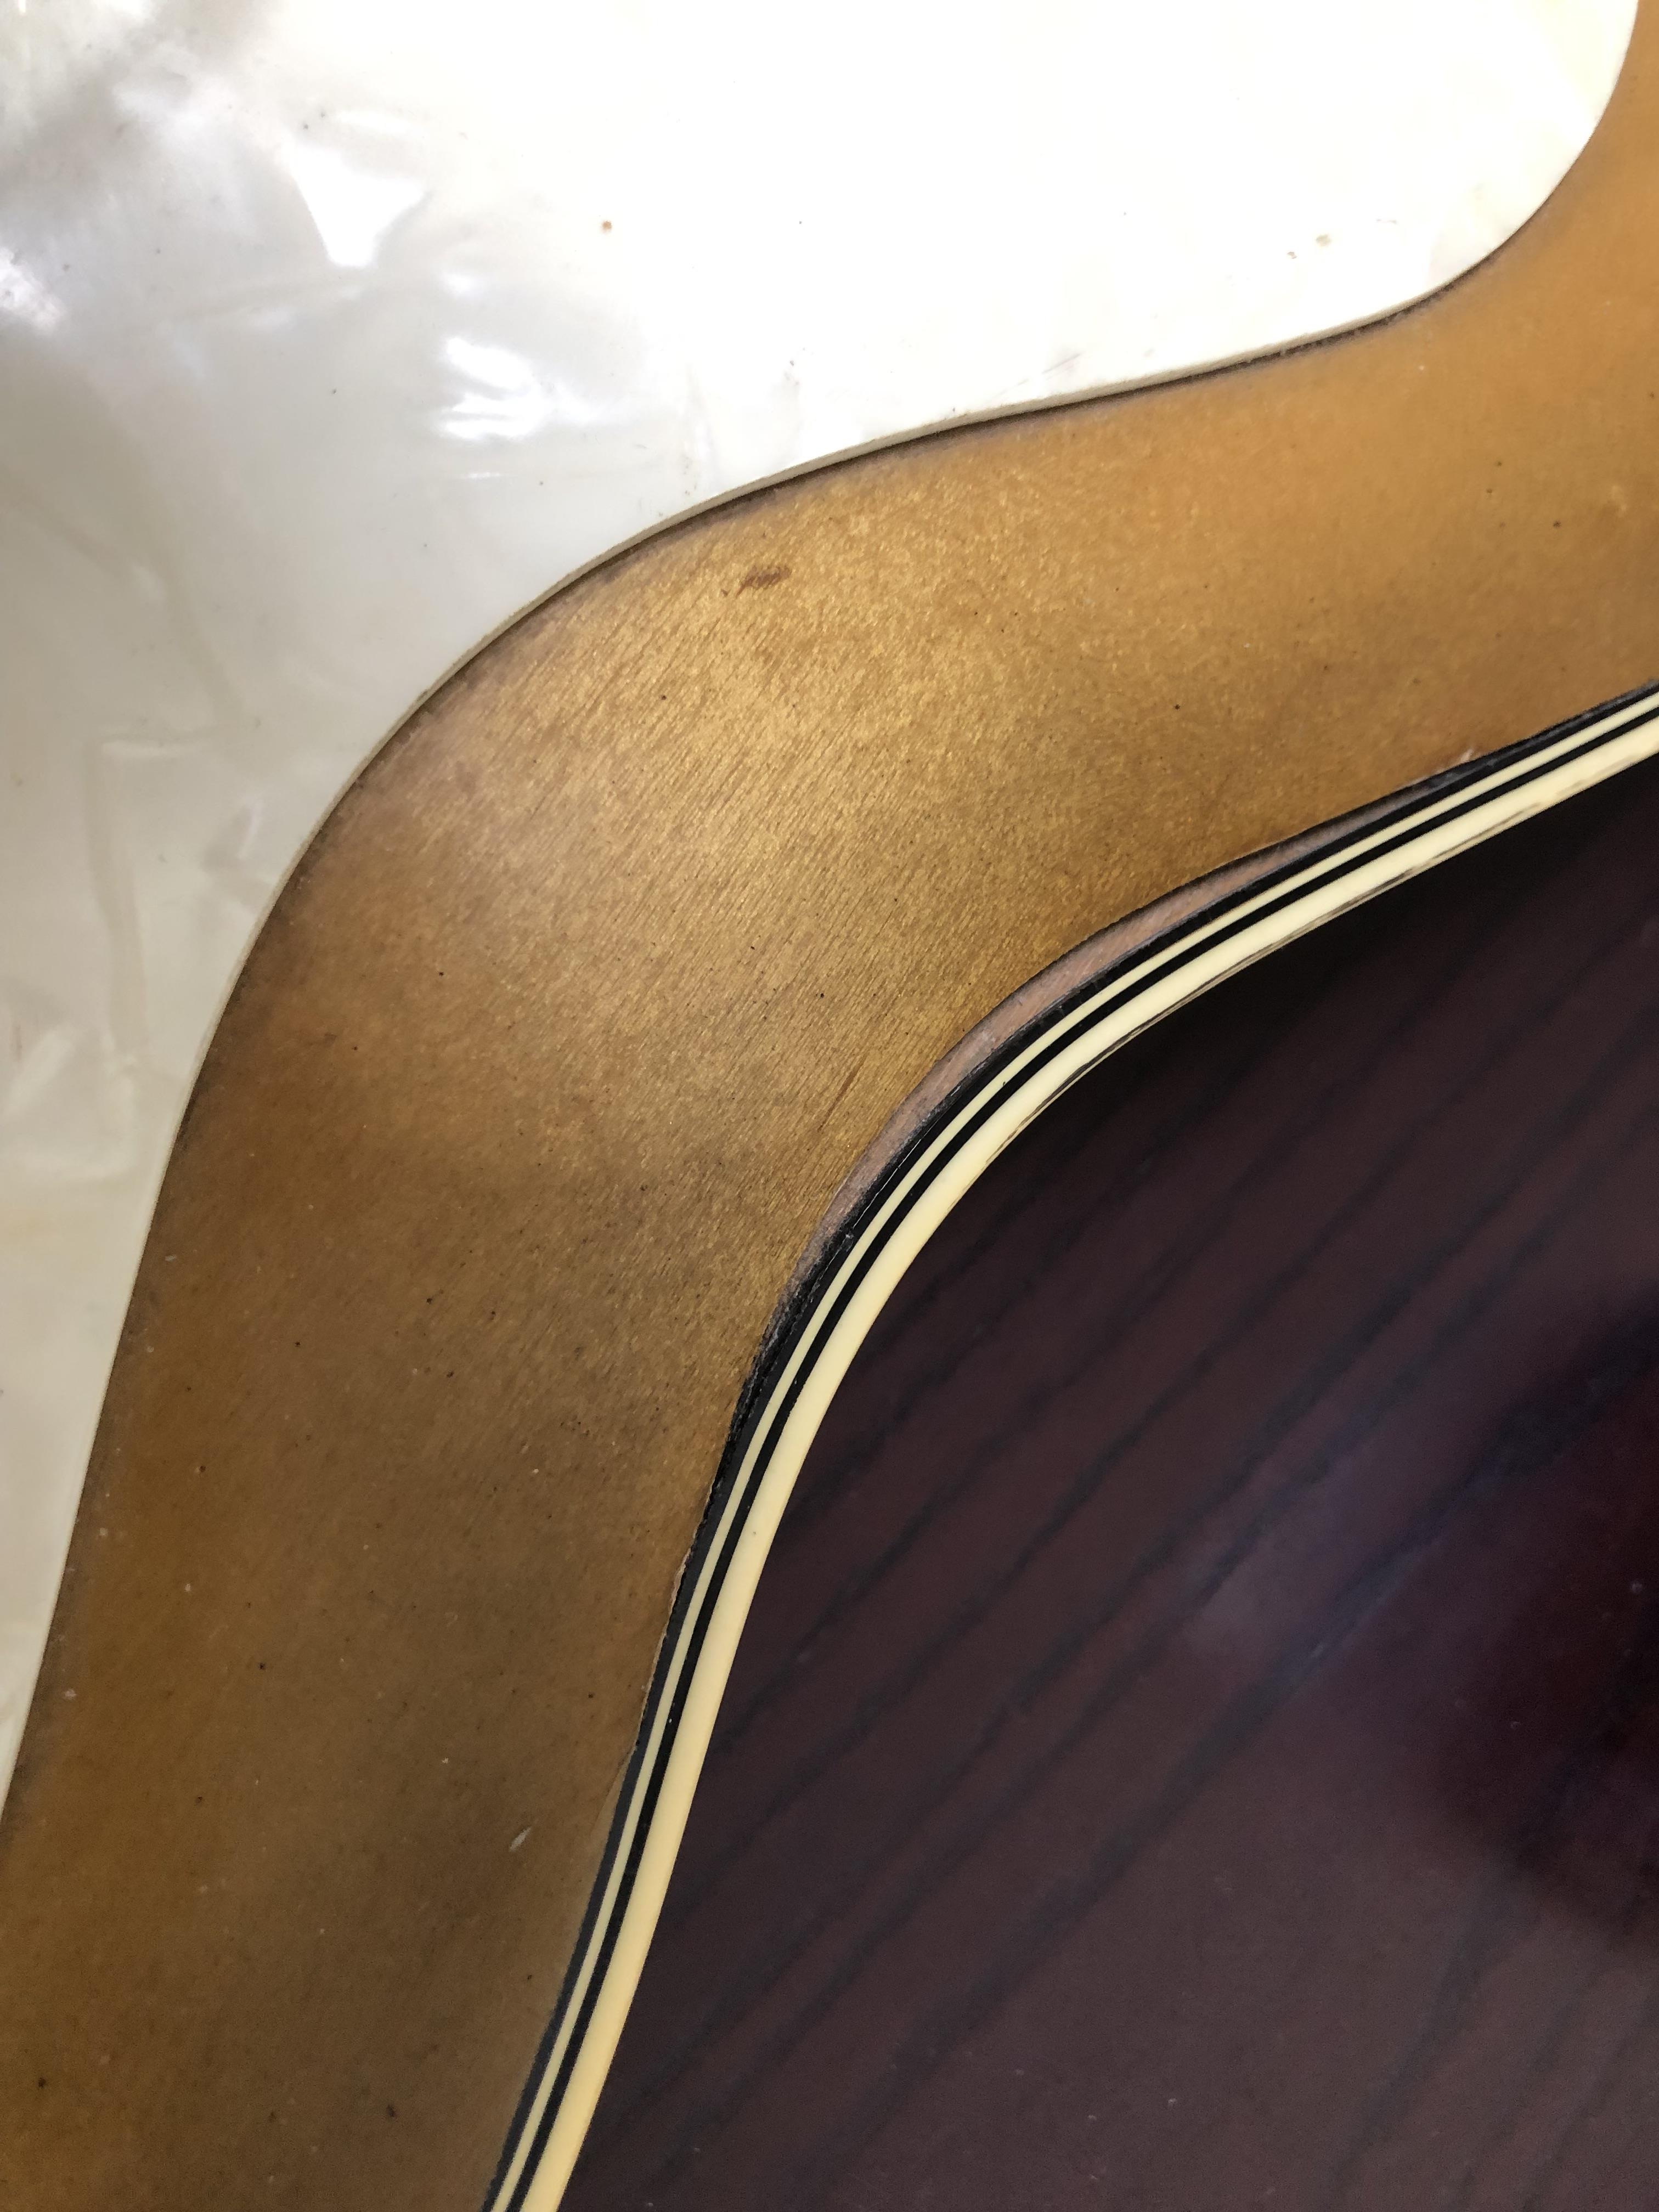 A RARE MARTIN COLETTI ELECTRIC GUITAR, PROBABLE 1950s MODEL, MOTHER OF PEARL SCRATCH PLATE, MADE - Image 12 of 14